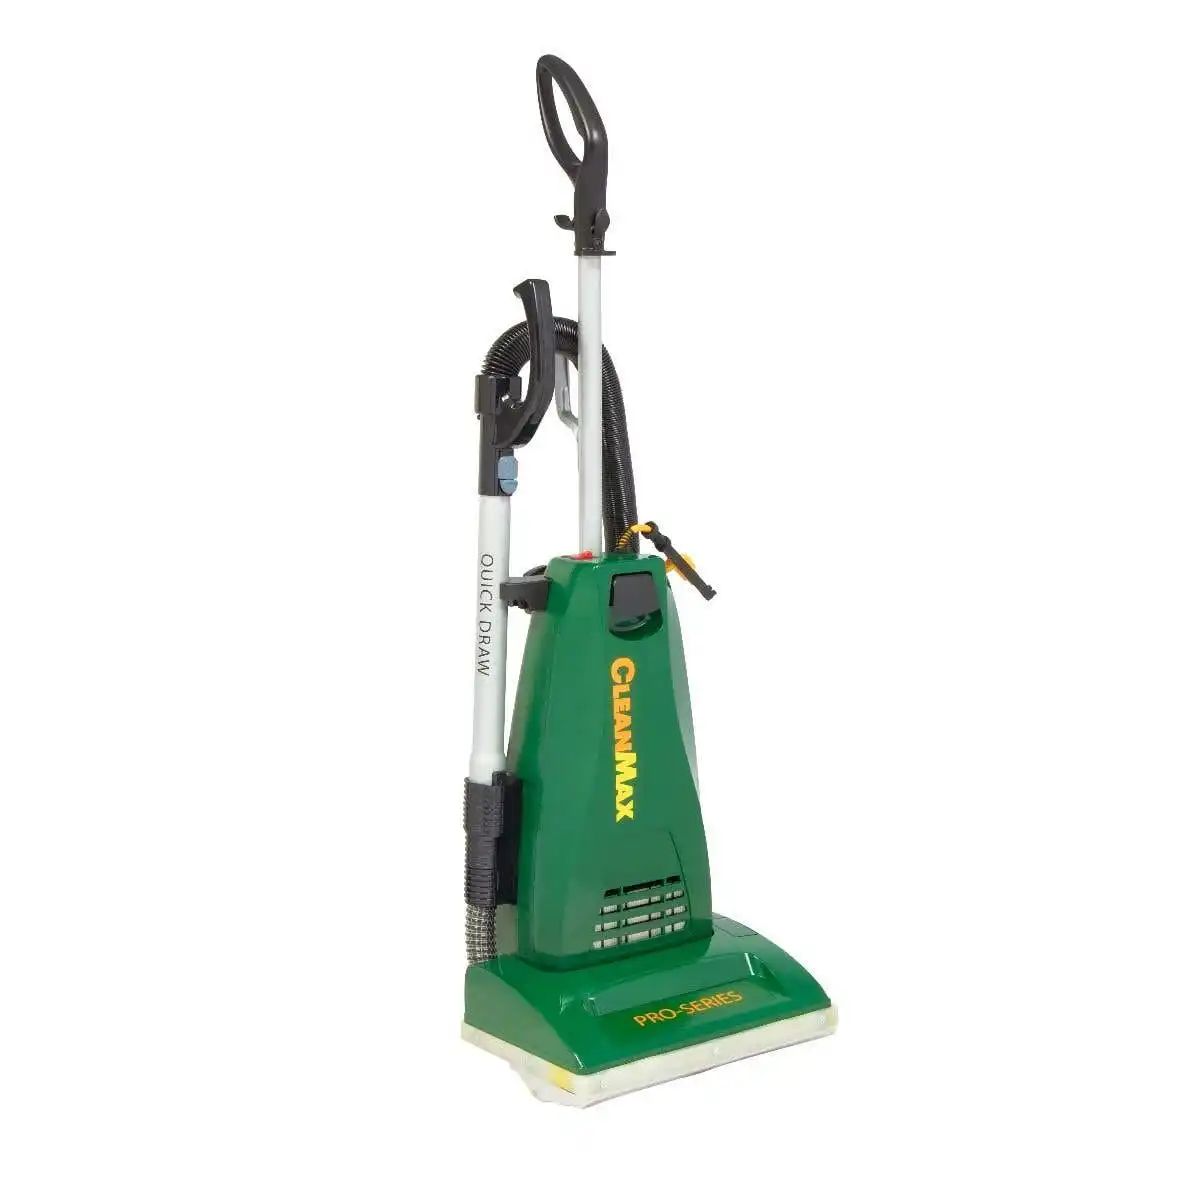 CleanMax, CleanMax Pro-Series Upright With Tools Onboard